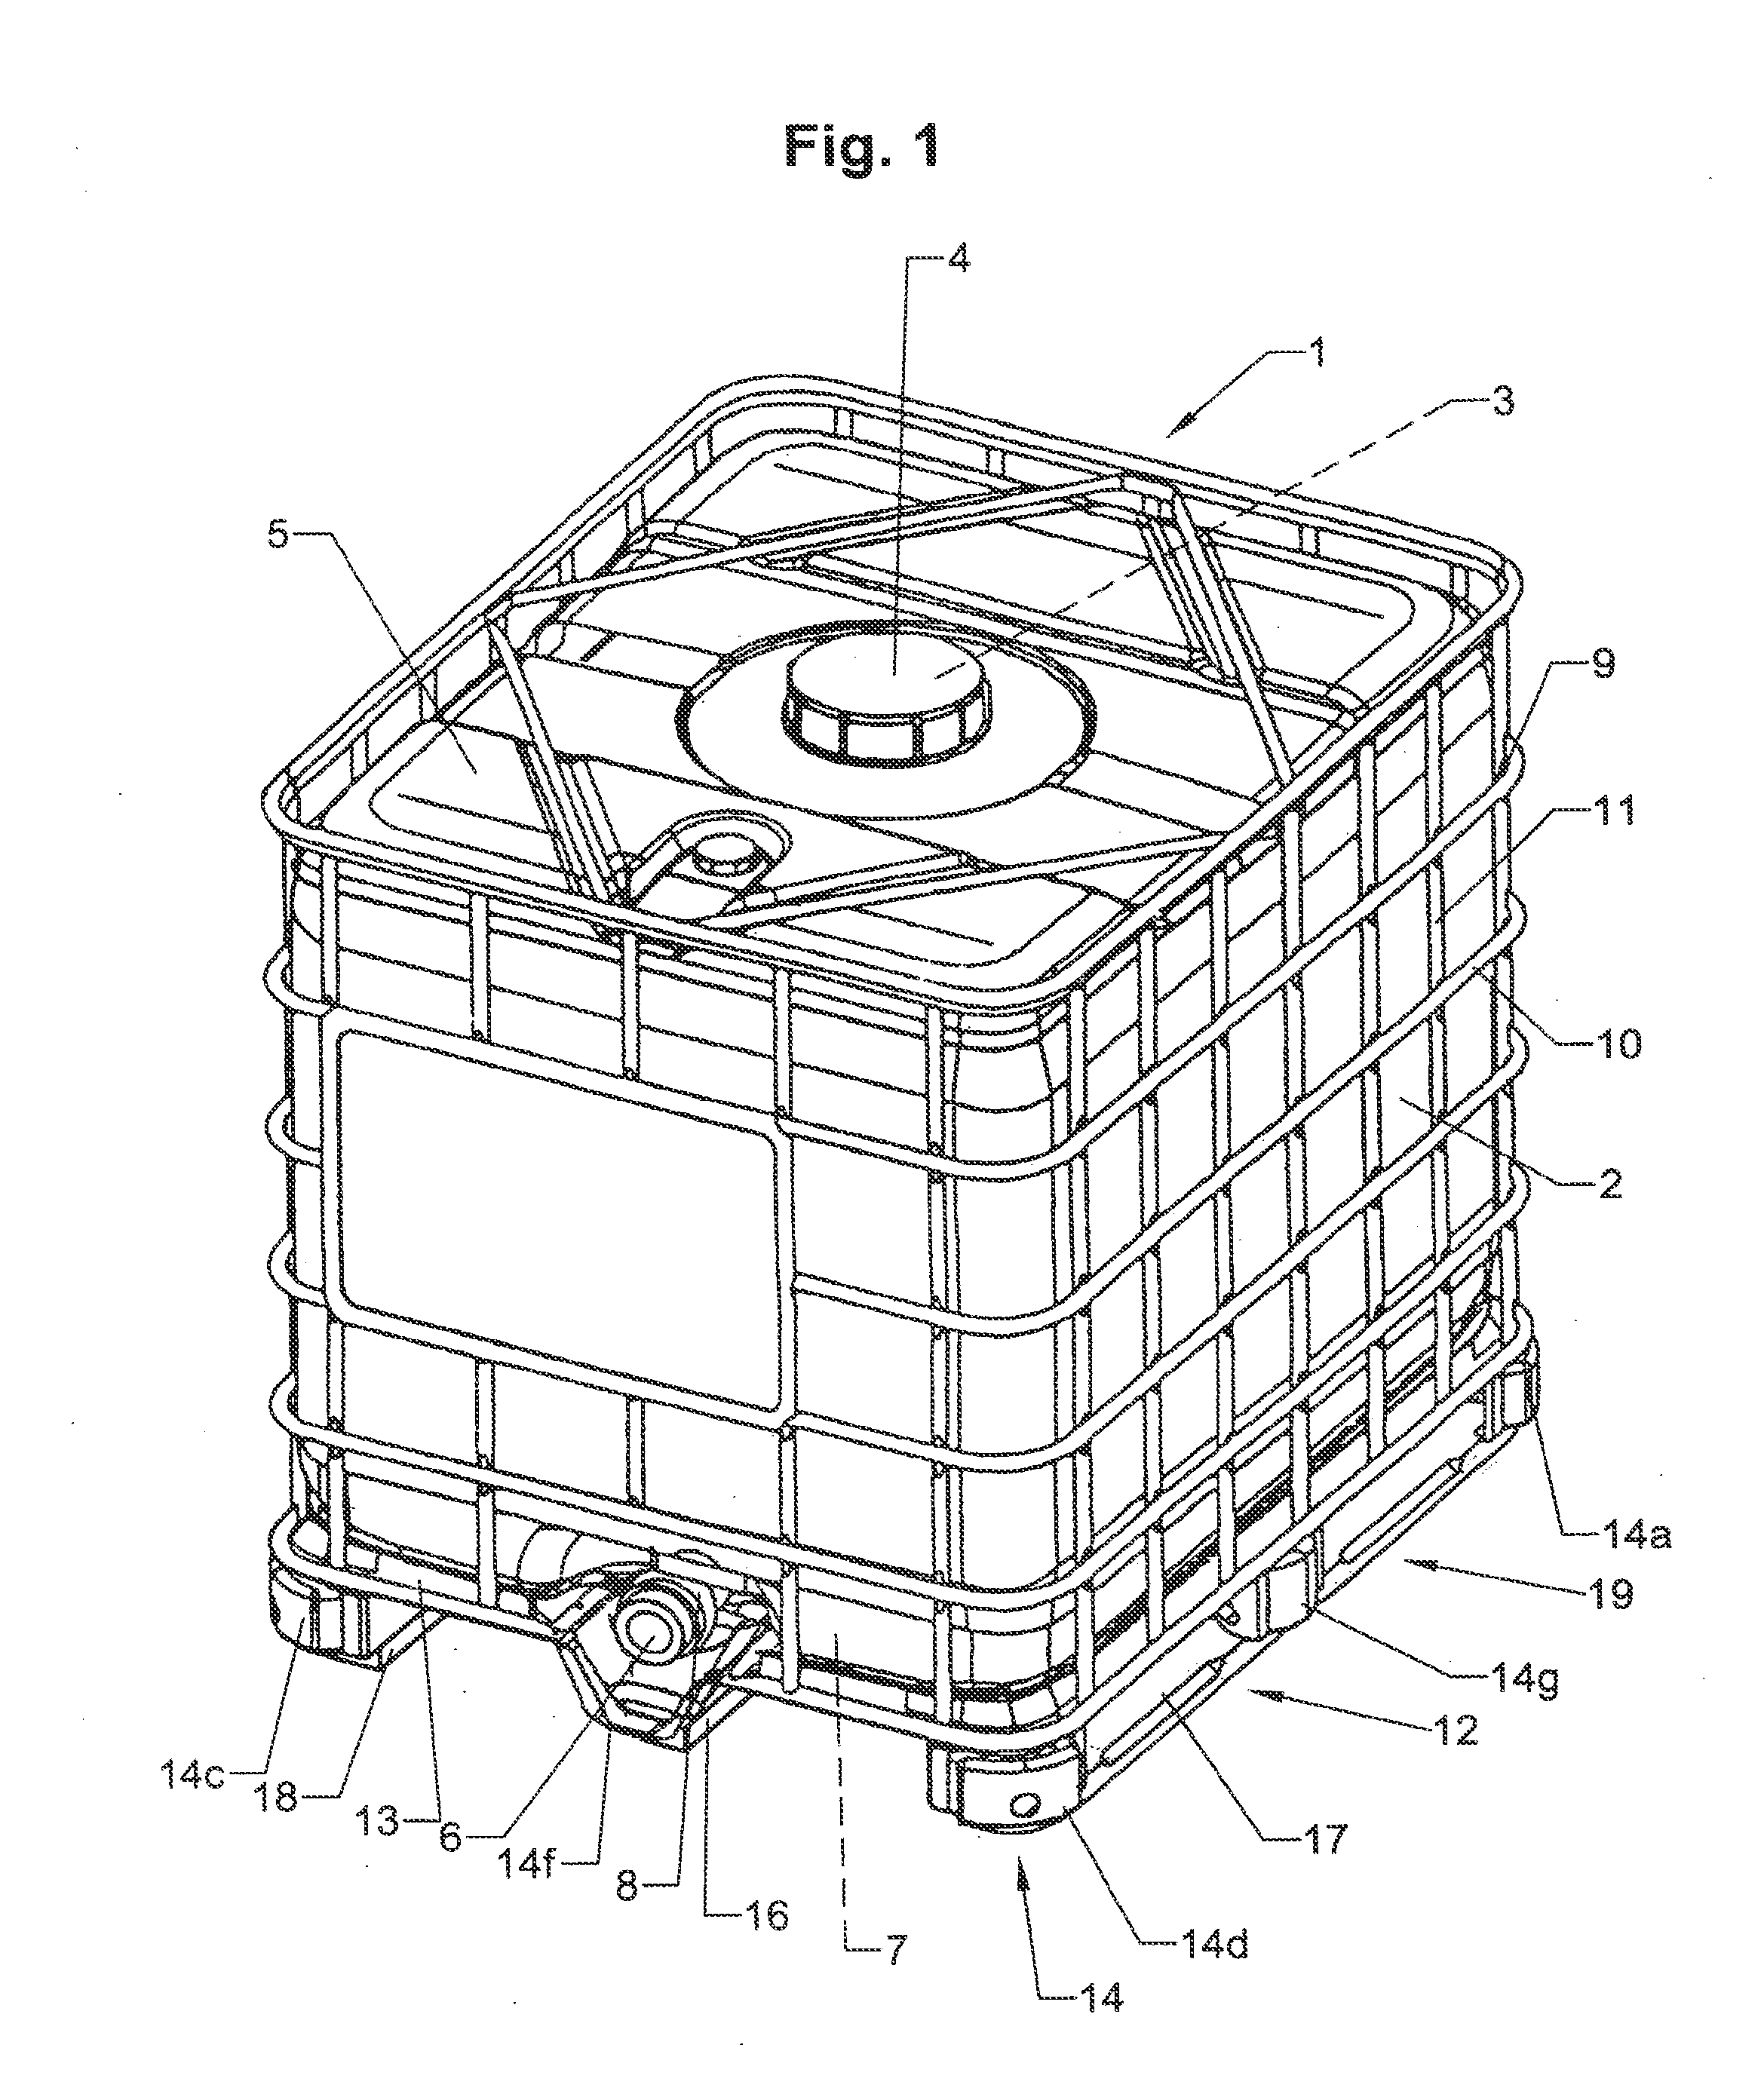 Pallet-like support base for transport and storage containers for liquids